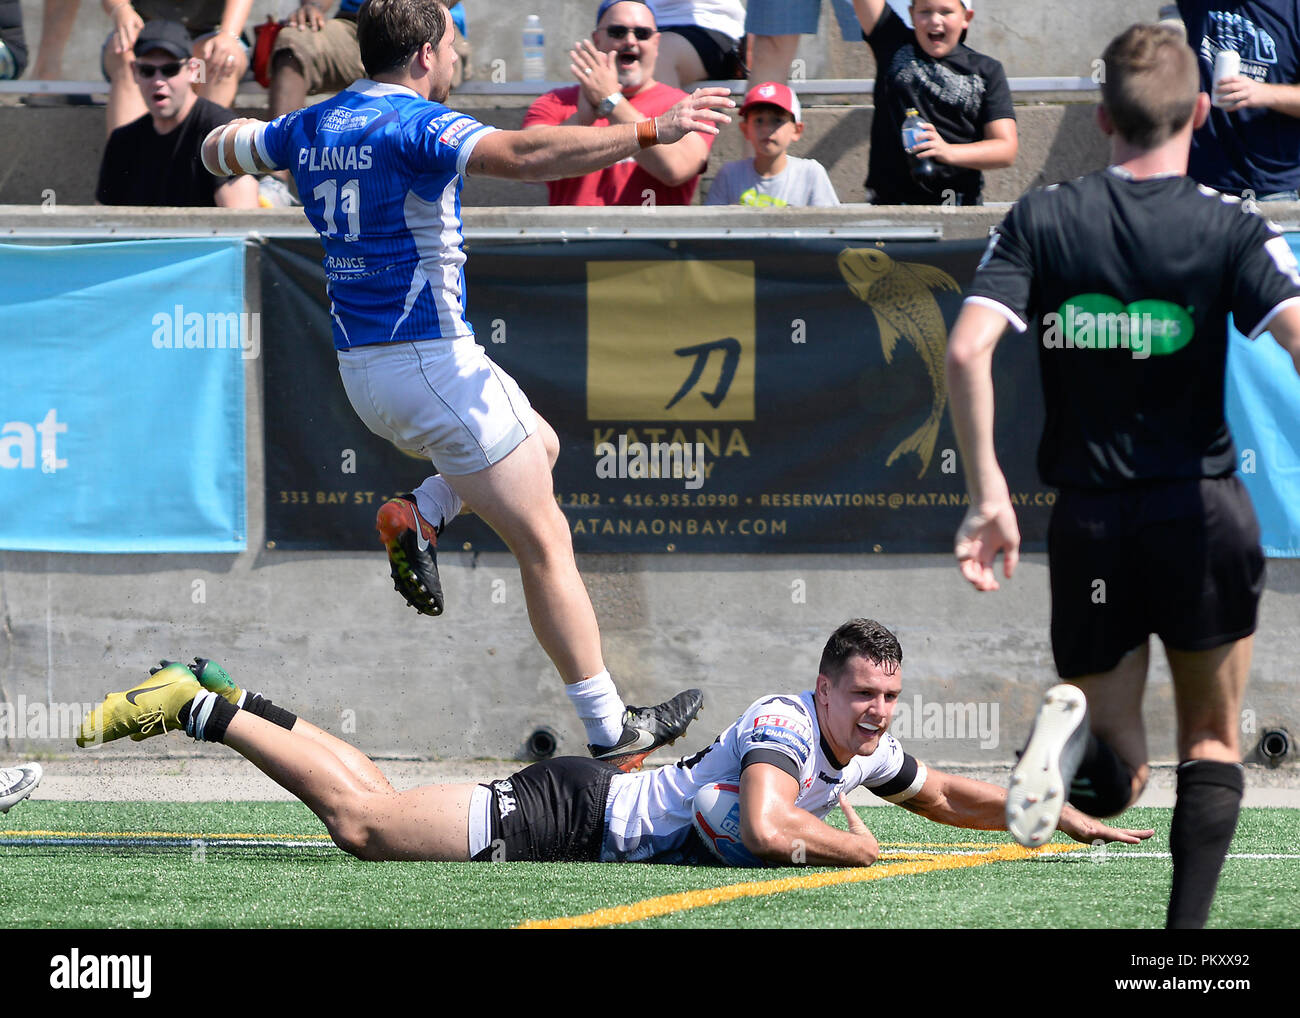 Lamport Stadium, Toronto, Ontario, Canada, 15th September 2018.   Nick Rawsthorne of Toronto Wolfpack scores the try against Toulouse Olympique during Toronto Wolfpack v Toulouse Olympique in the Super 8's The Qualifiers.   Credit: Touchlinepics/Alamy Live News Stock Photo